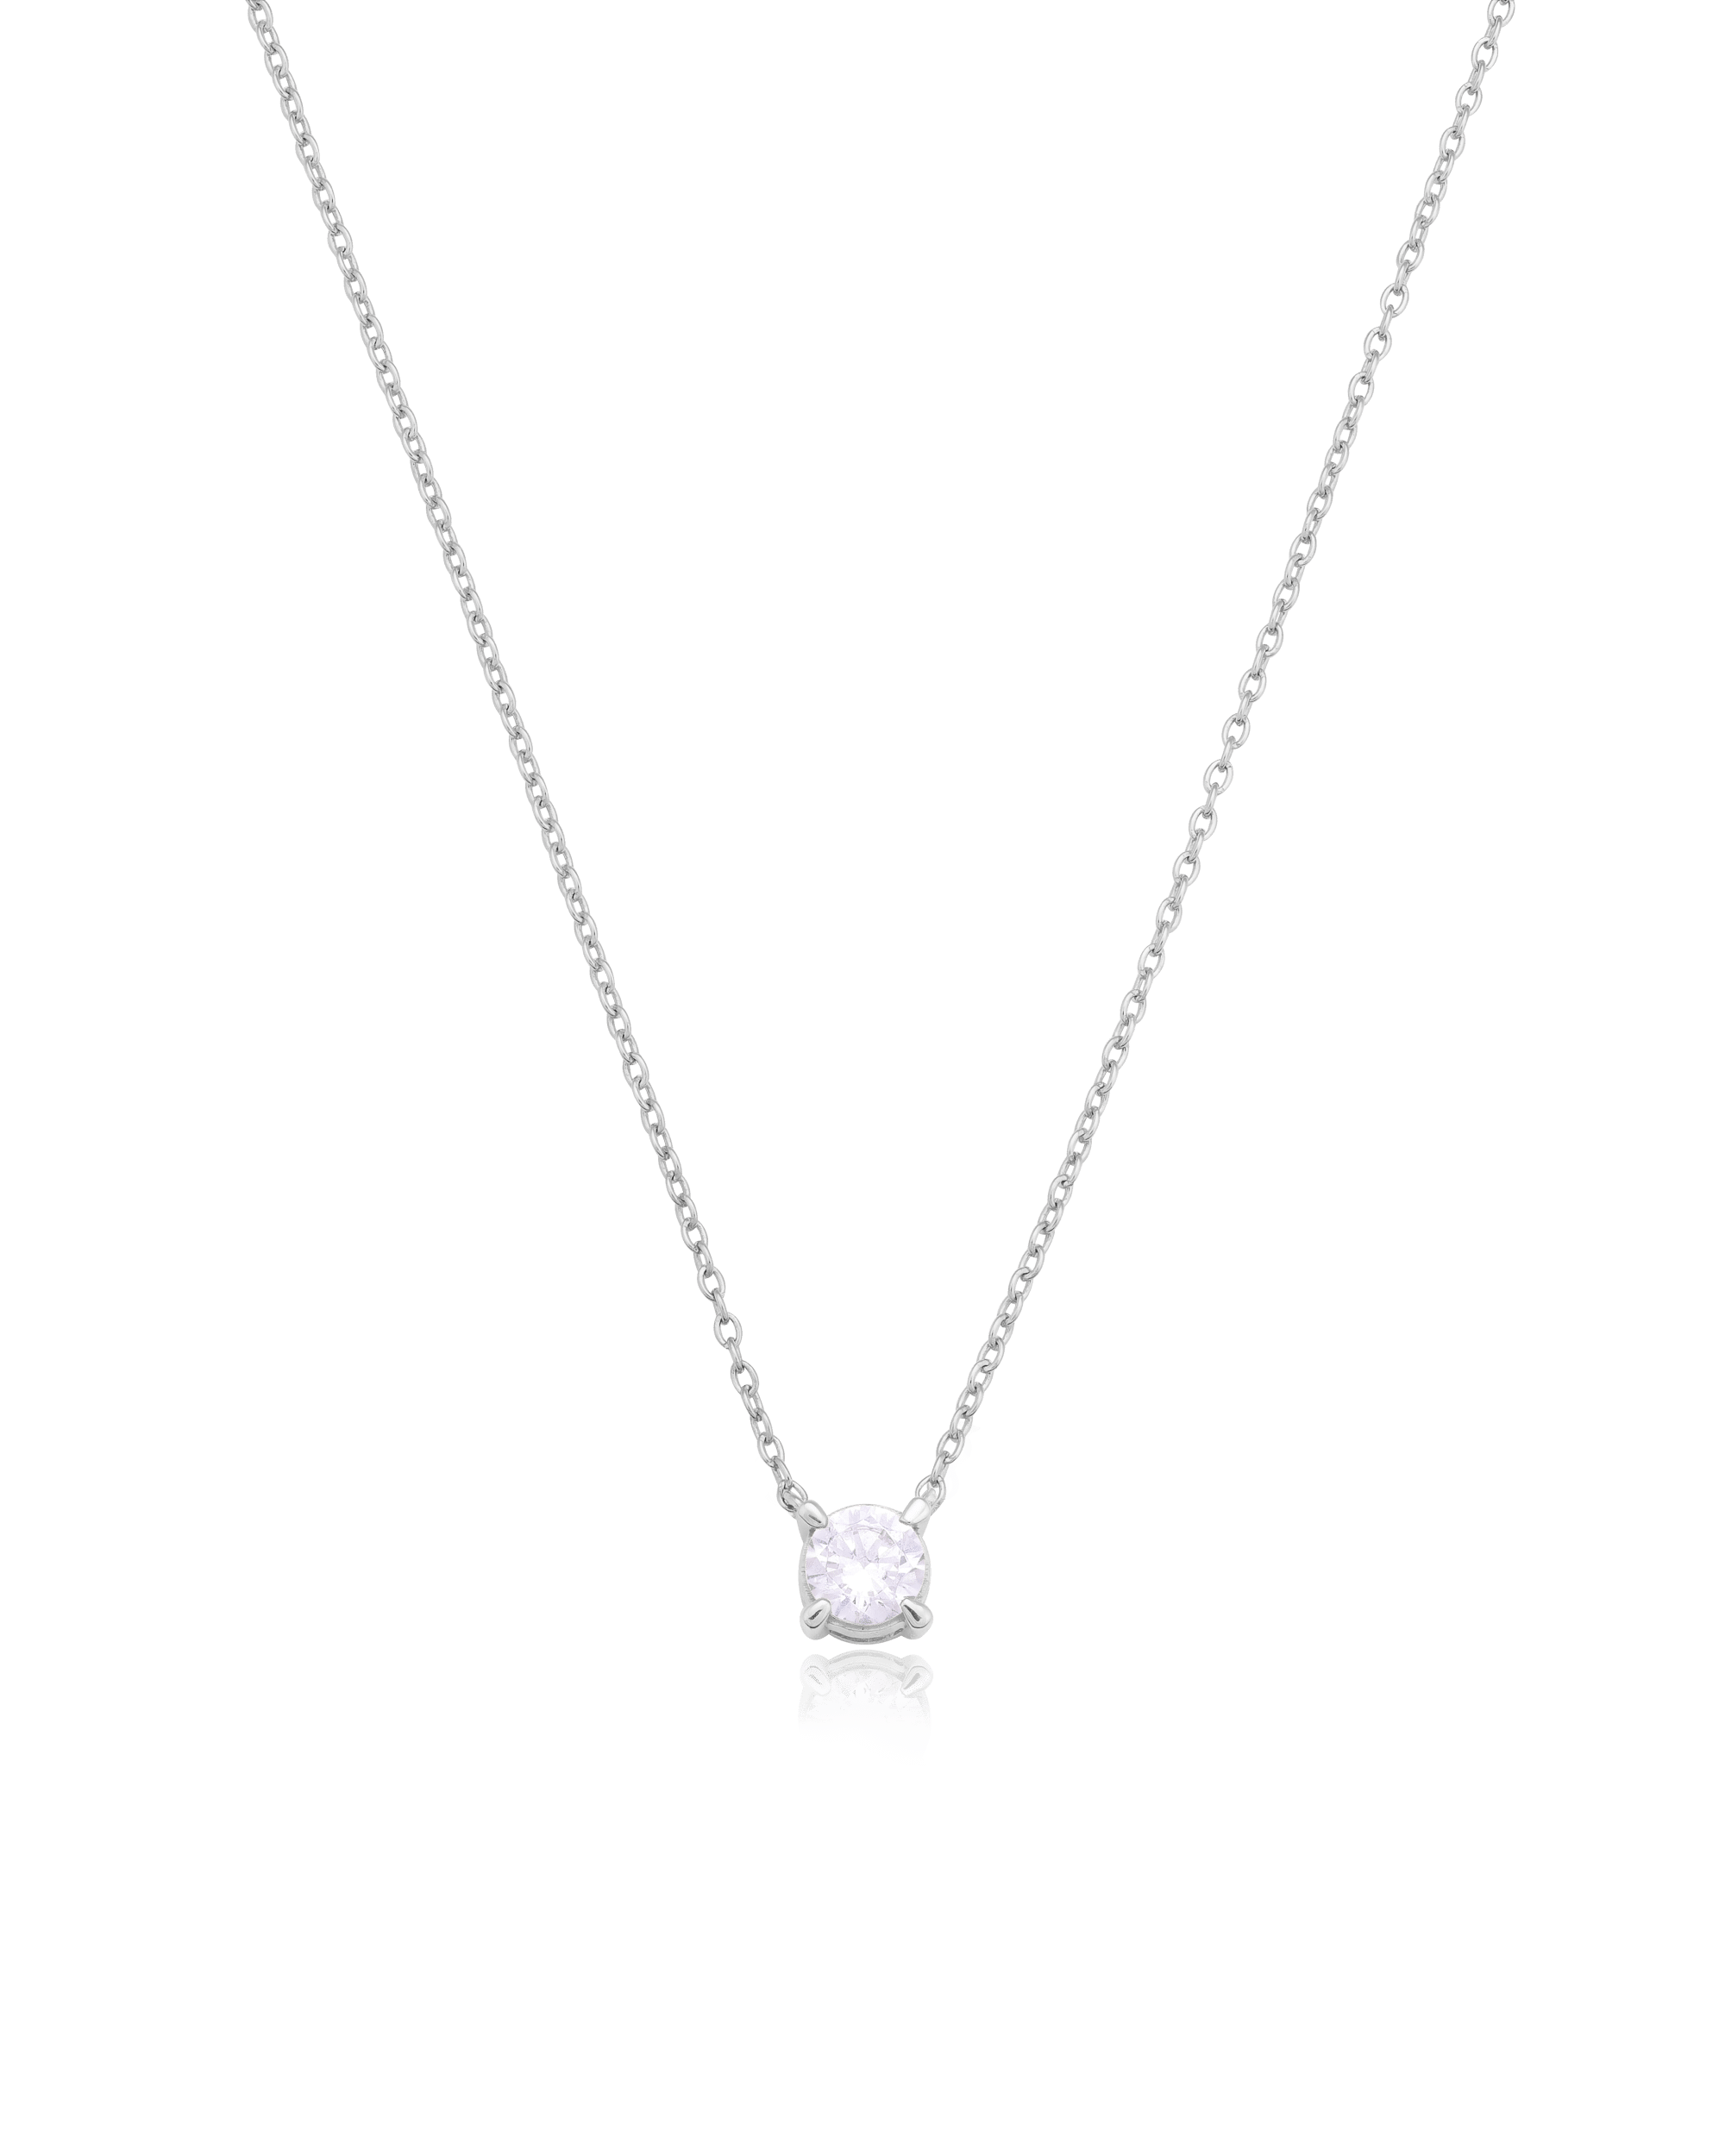 Round Solitaire Diamond Necklace - 14K Yellow Gold Necklaces magal-dev 